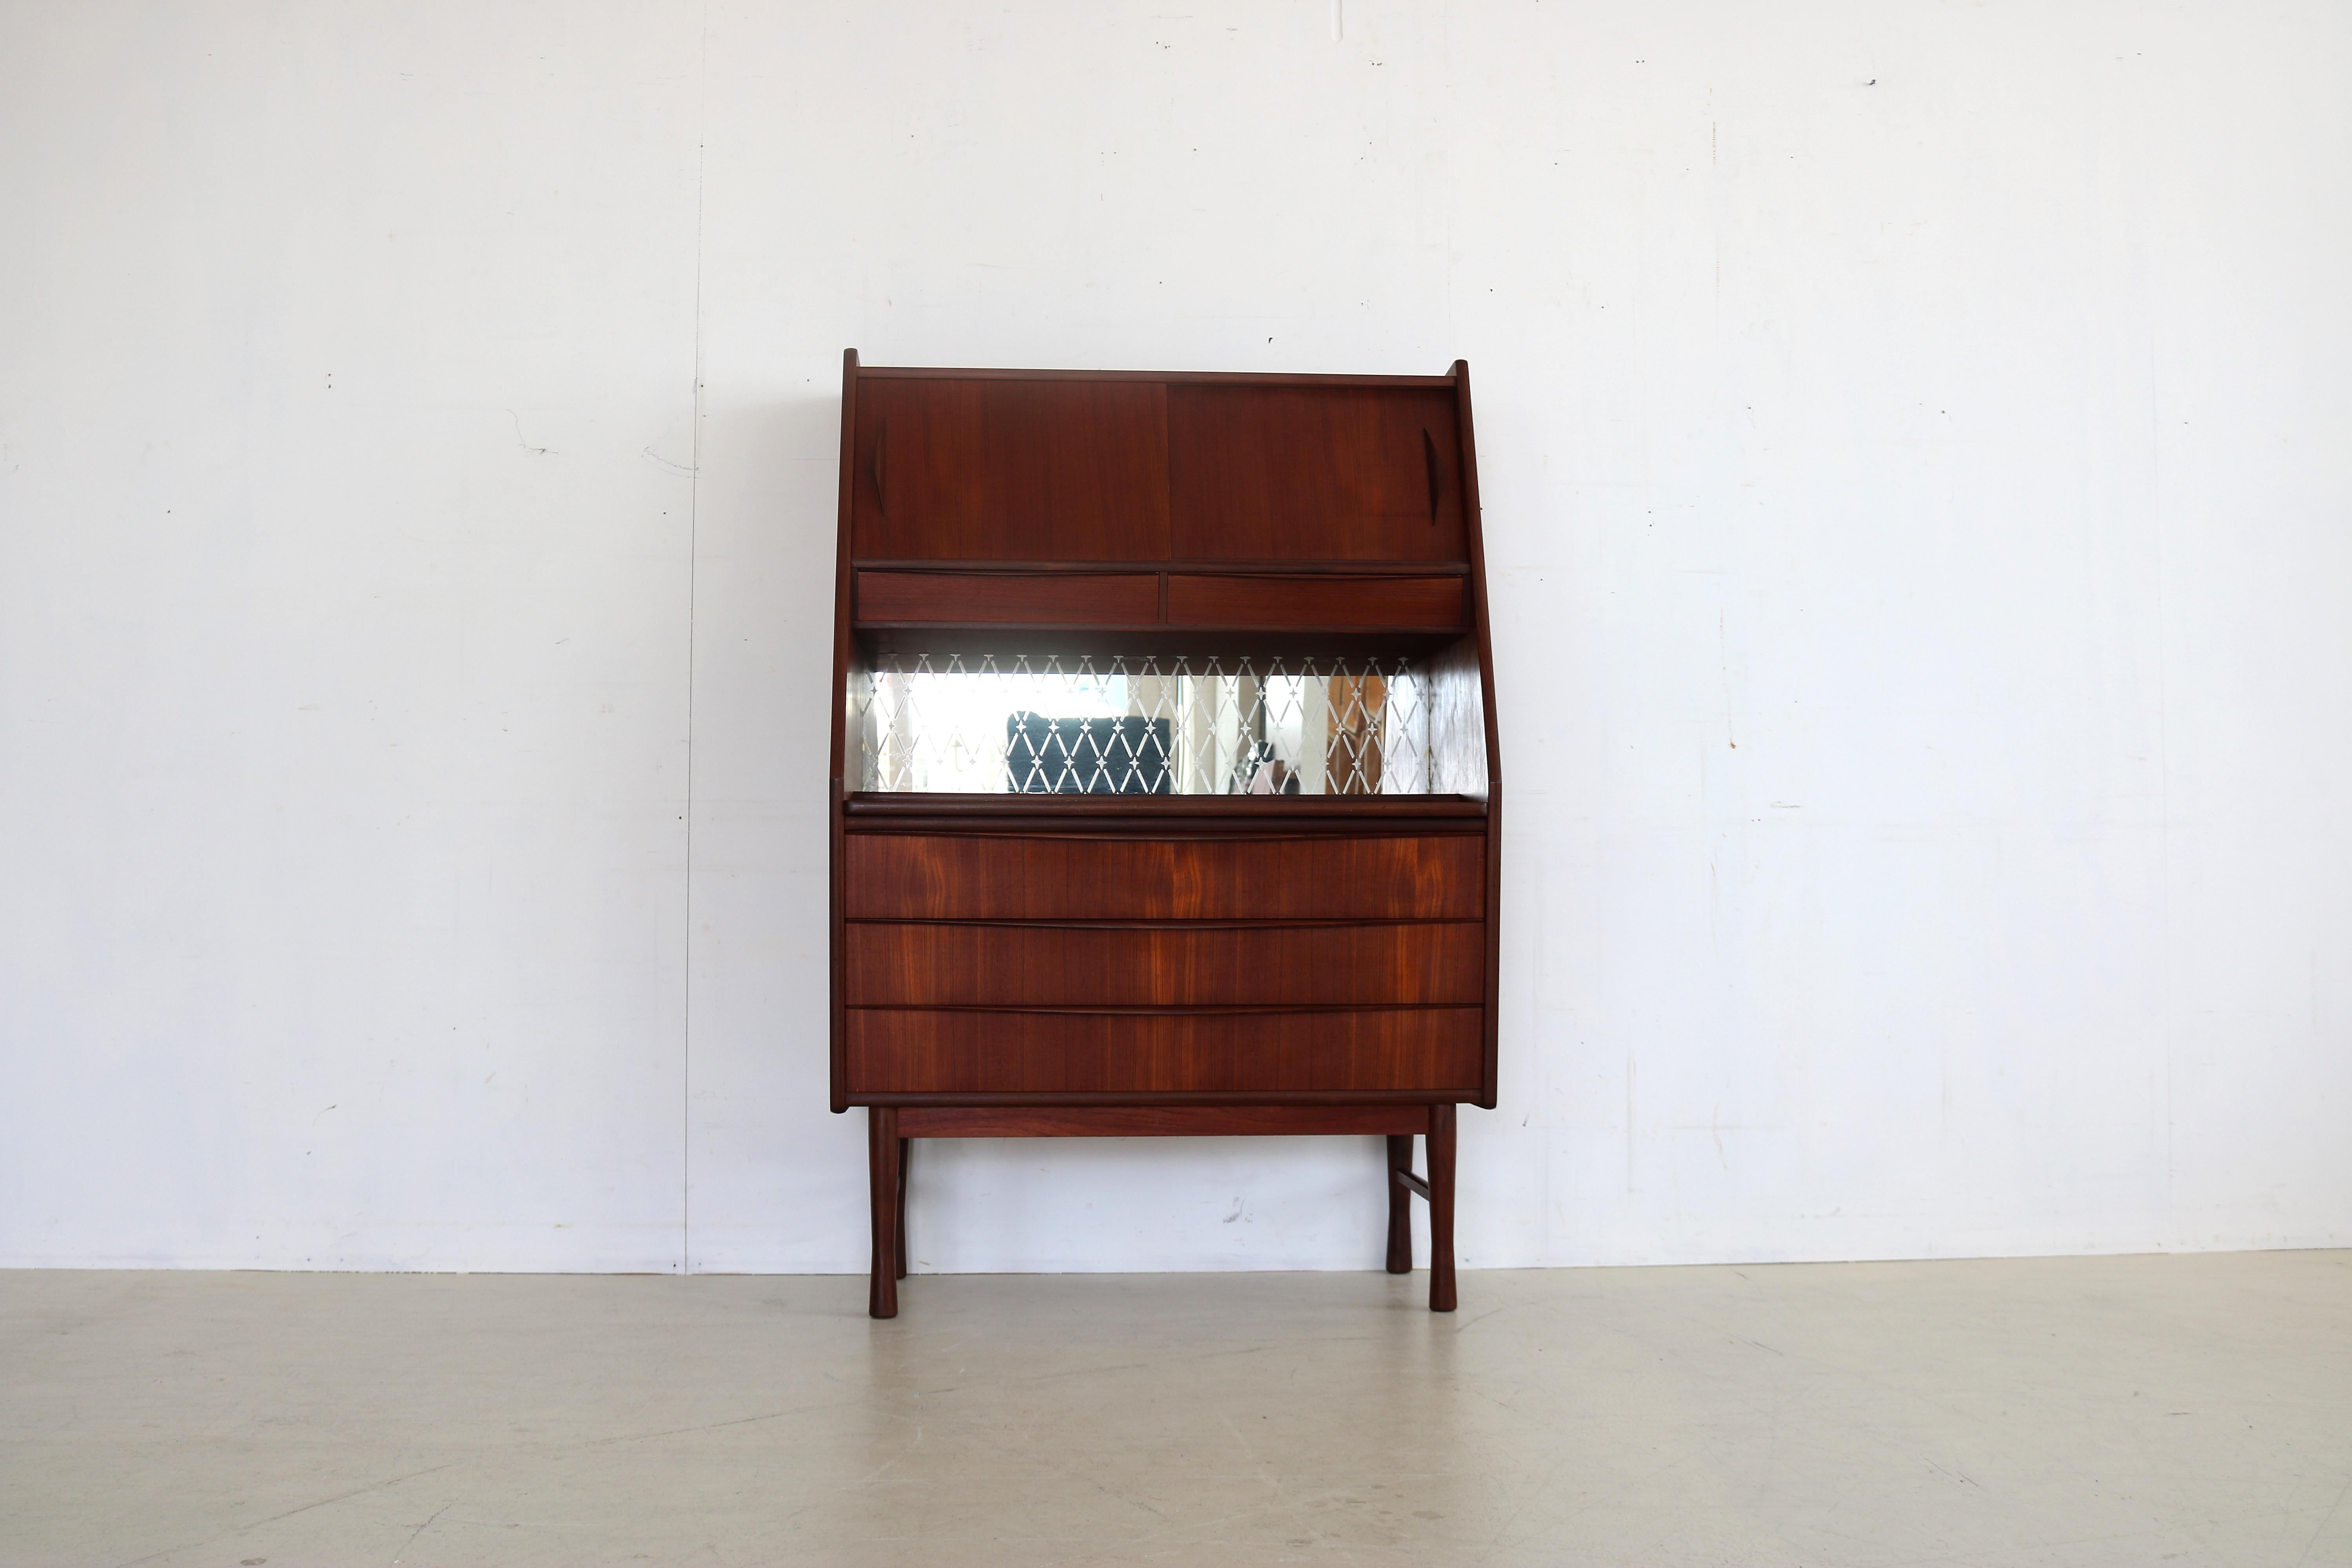 Vintage Secretary cabinet teak 1960s Danish

Period 1960s
Designs unknown, Denmark
Conditions excellent light signs of use
Size 139 x 93 x 45 (hxwxd)

Details teak; glass;

Article number 1666